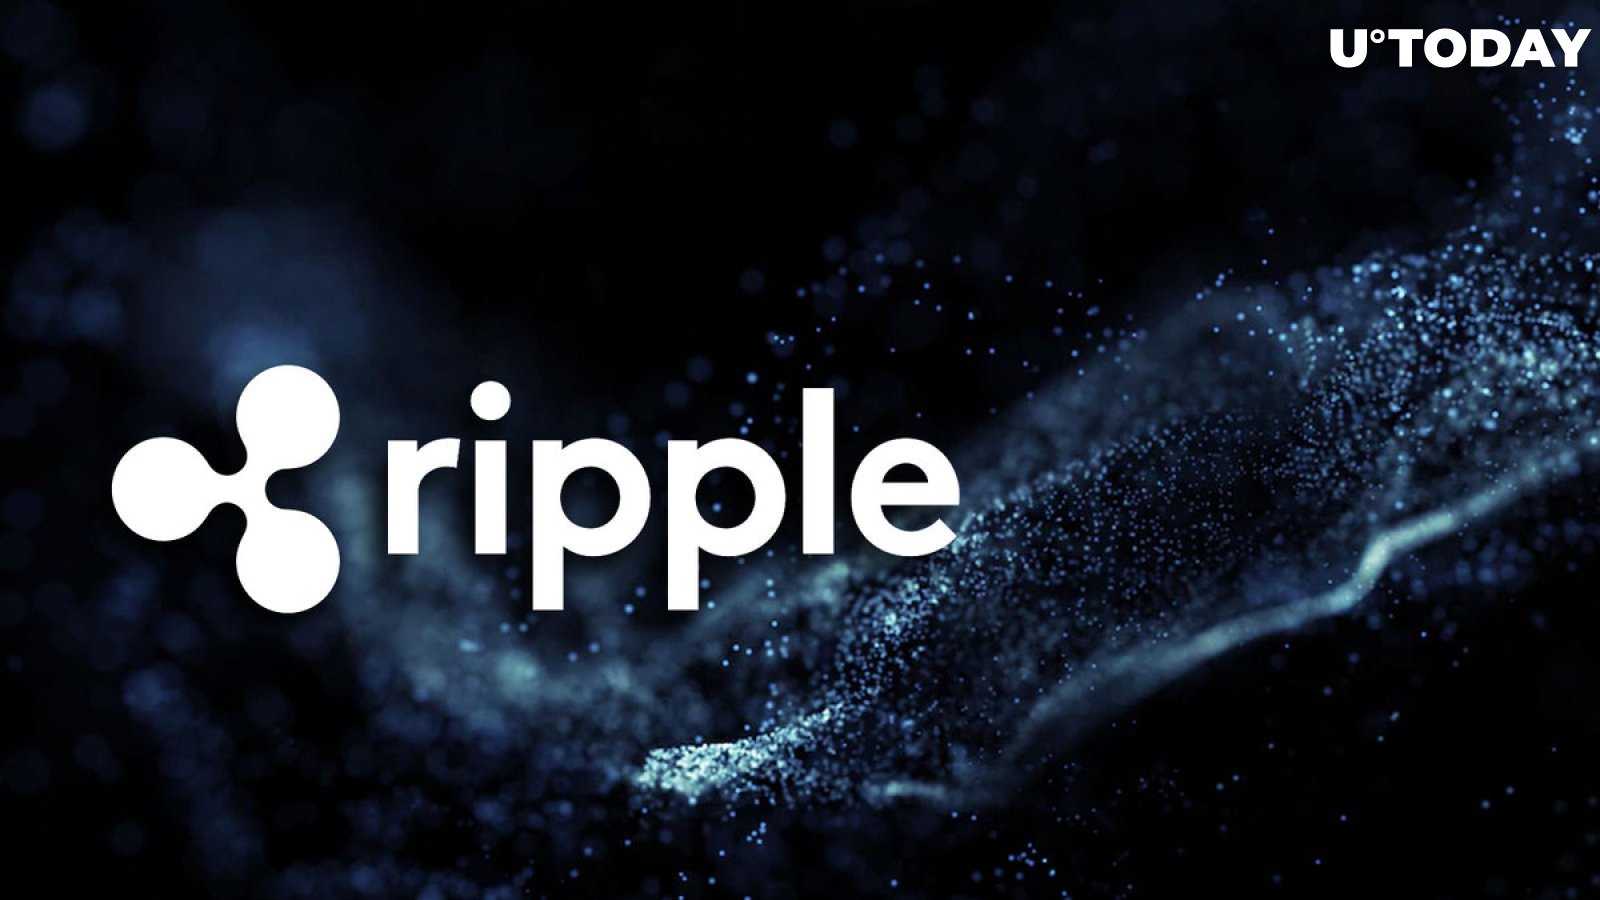 Ripple invests in Morgan State University